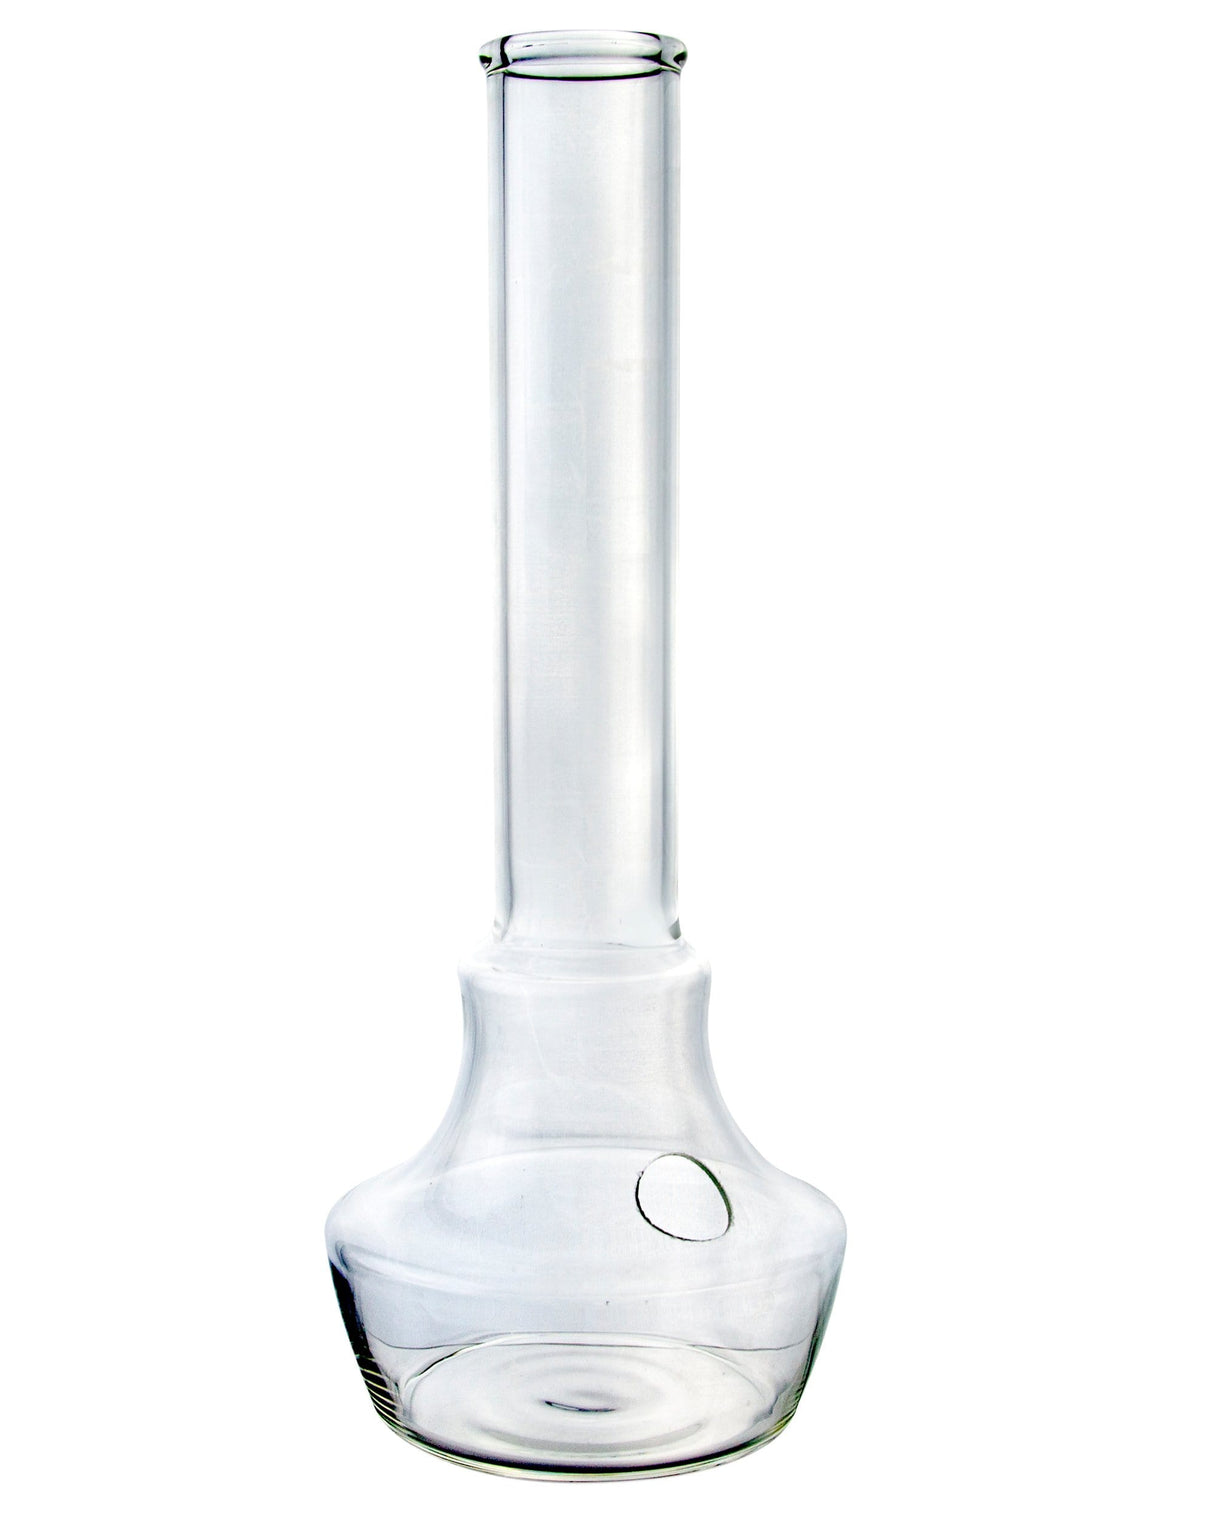 High Rise Gravity Bong by HighRise, clear borosilicate glass, extra large with heavy wall design